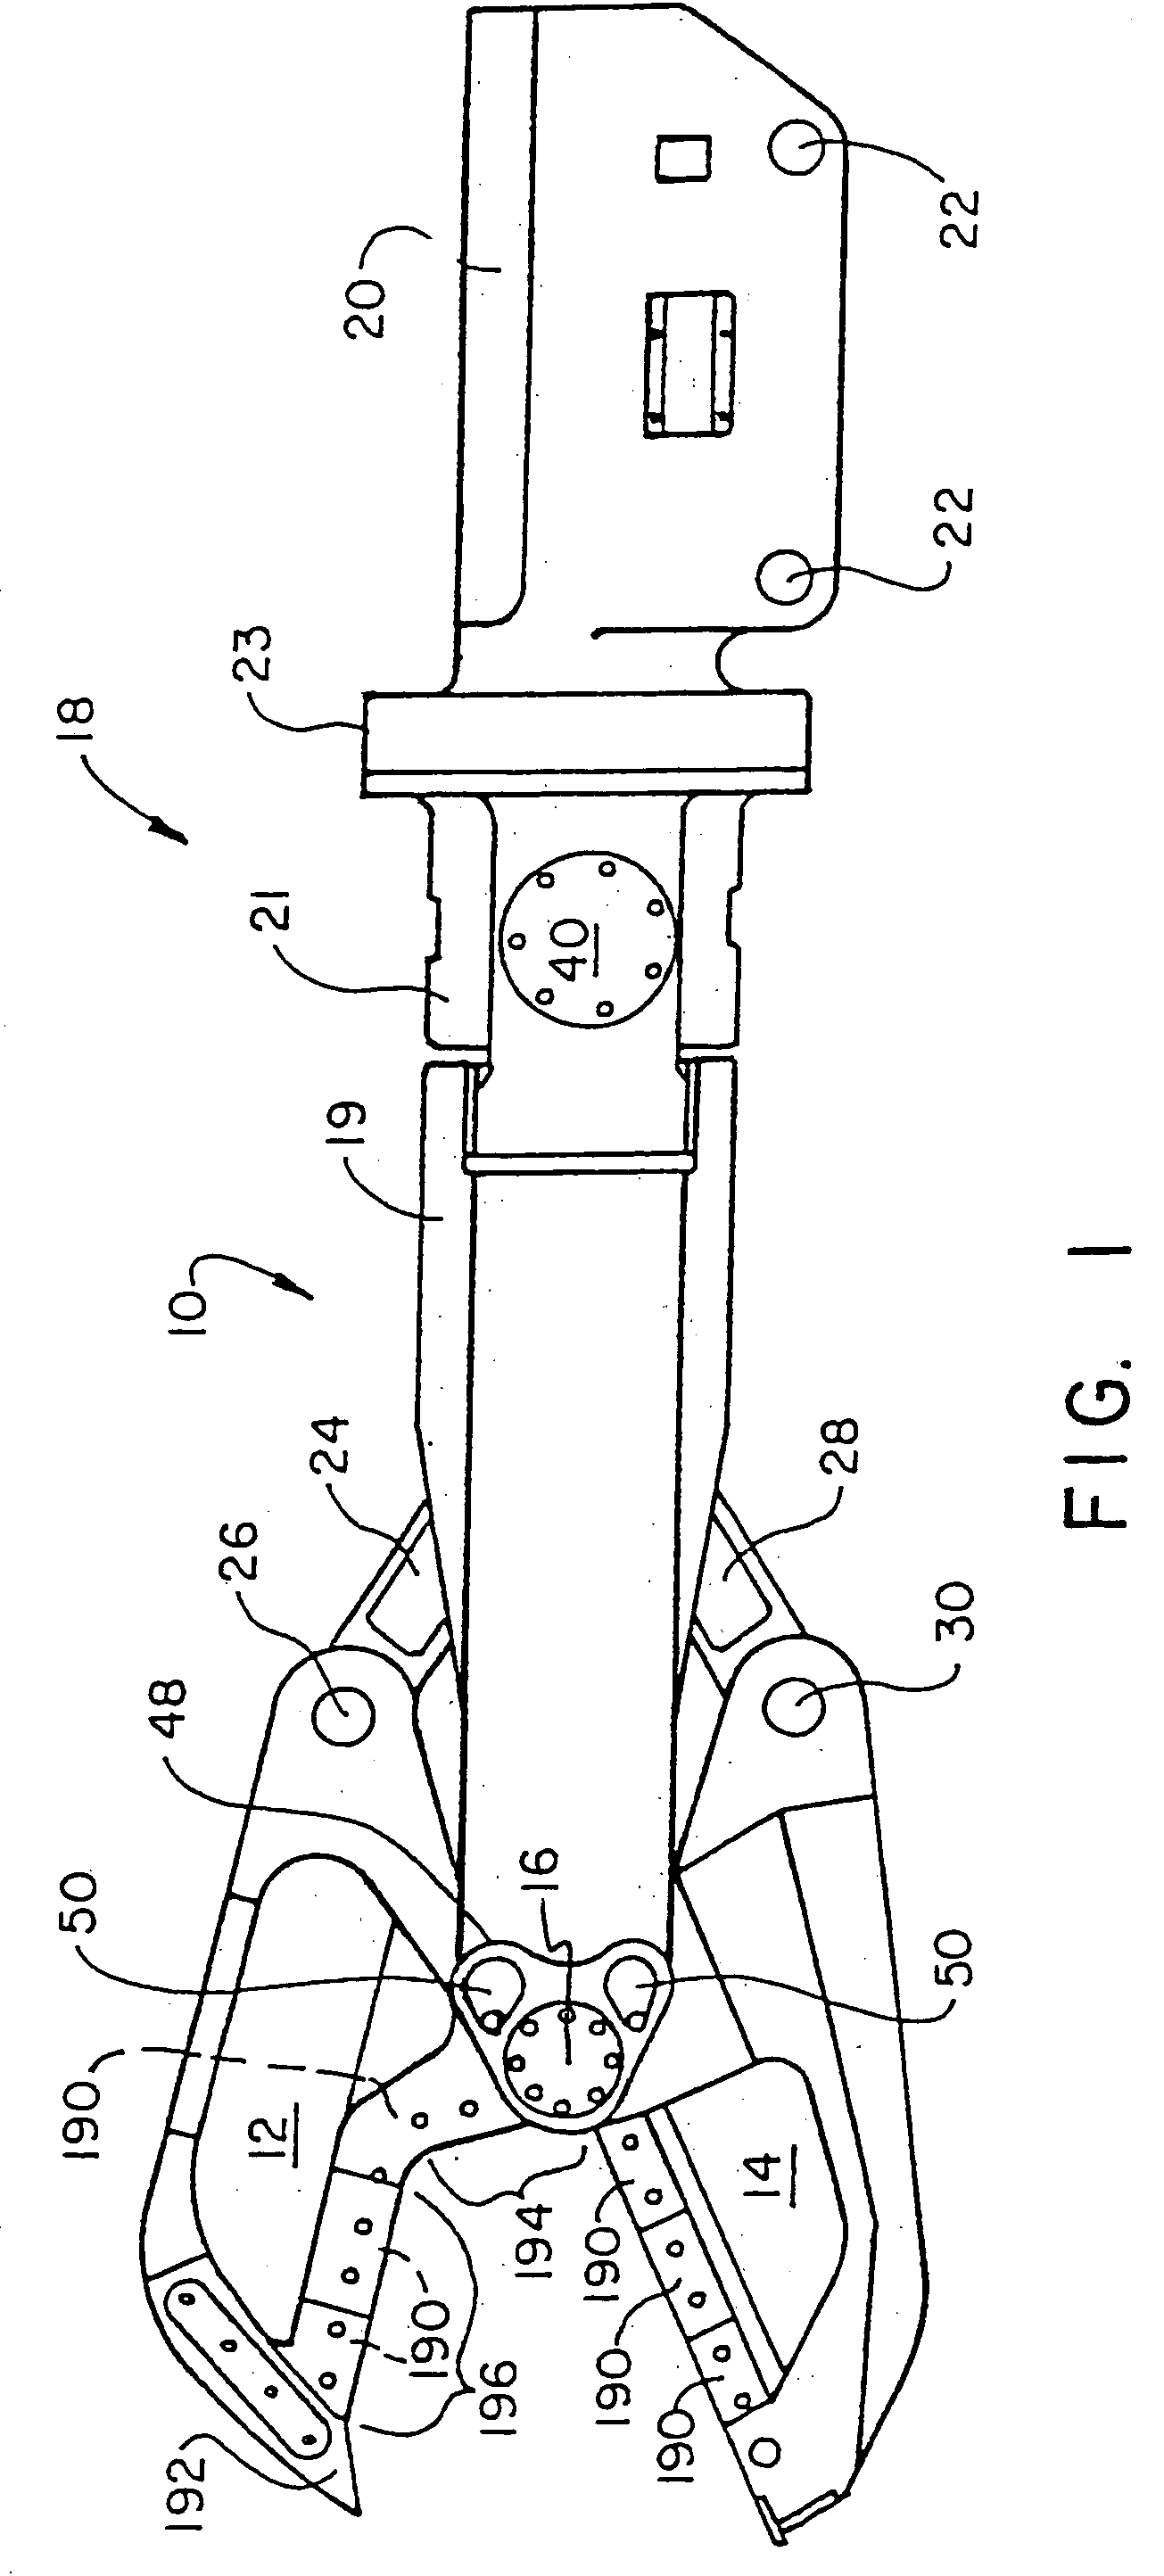 Multiple tool attachment system